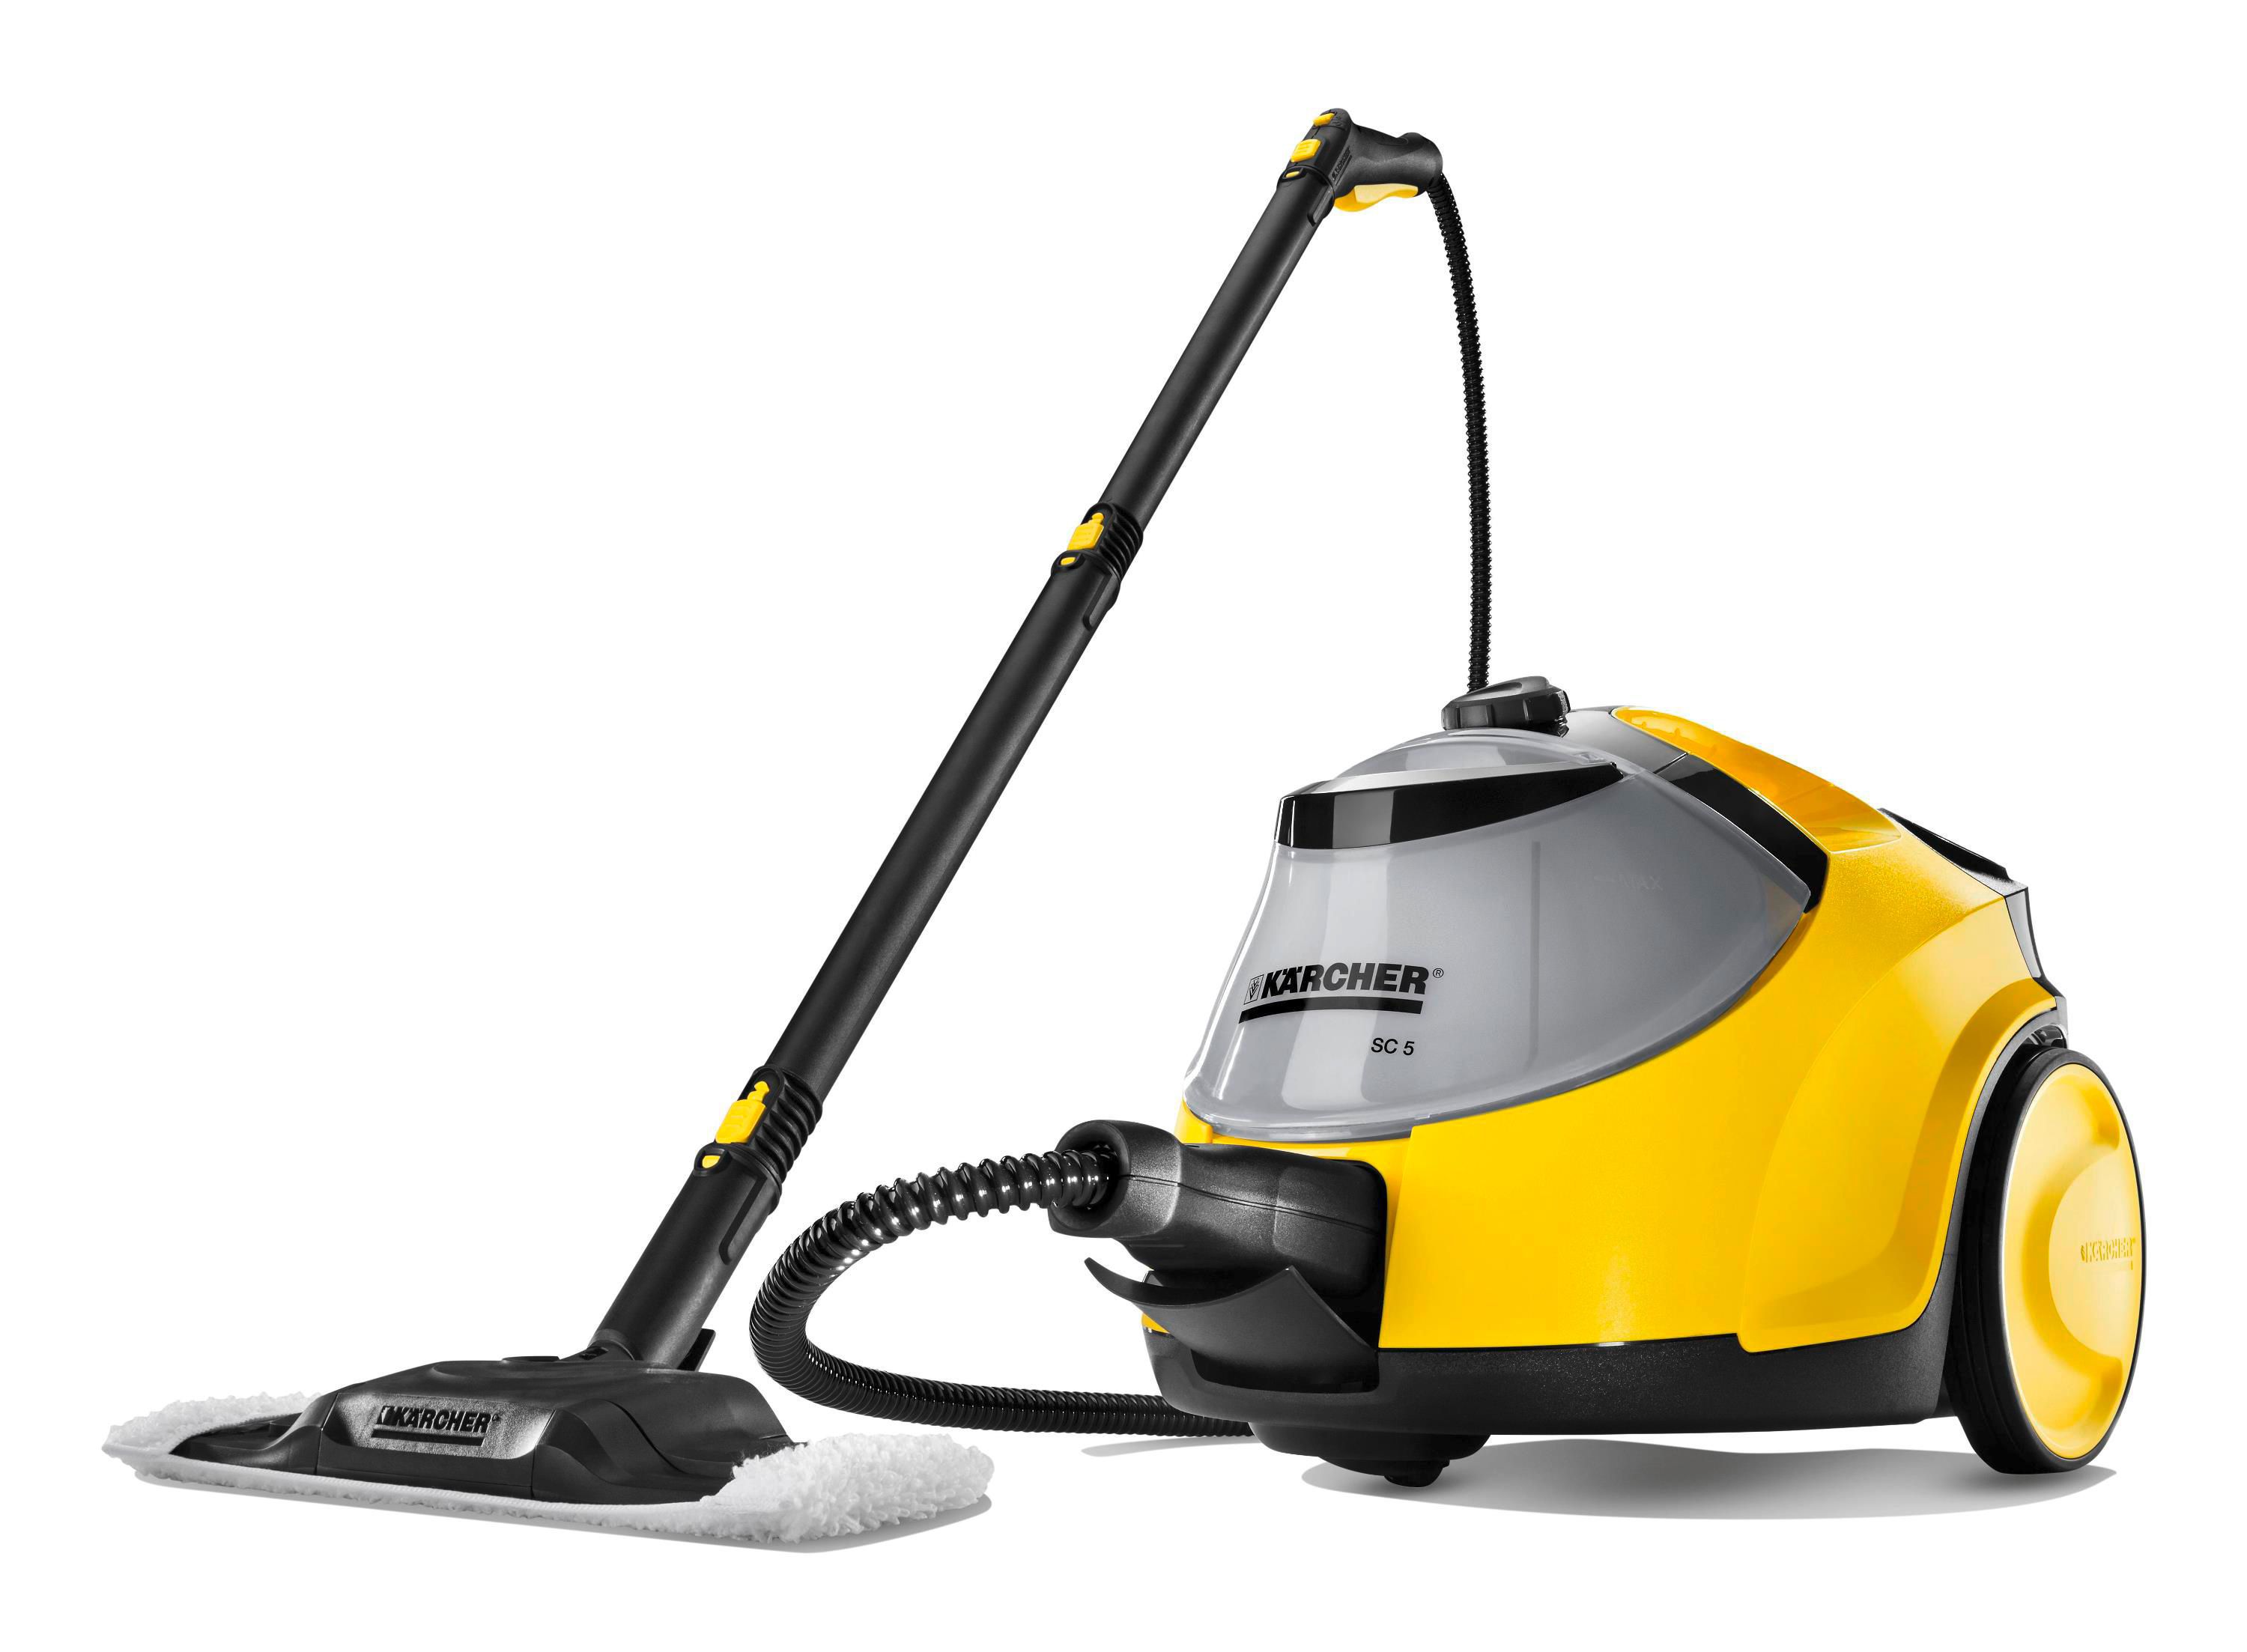 Karcher Sc5 Corded Steam Cleaner Departments Diy At B Q